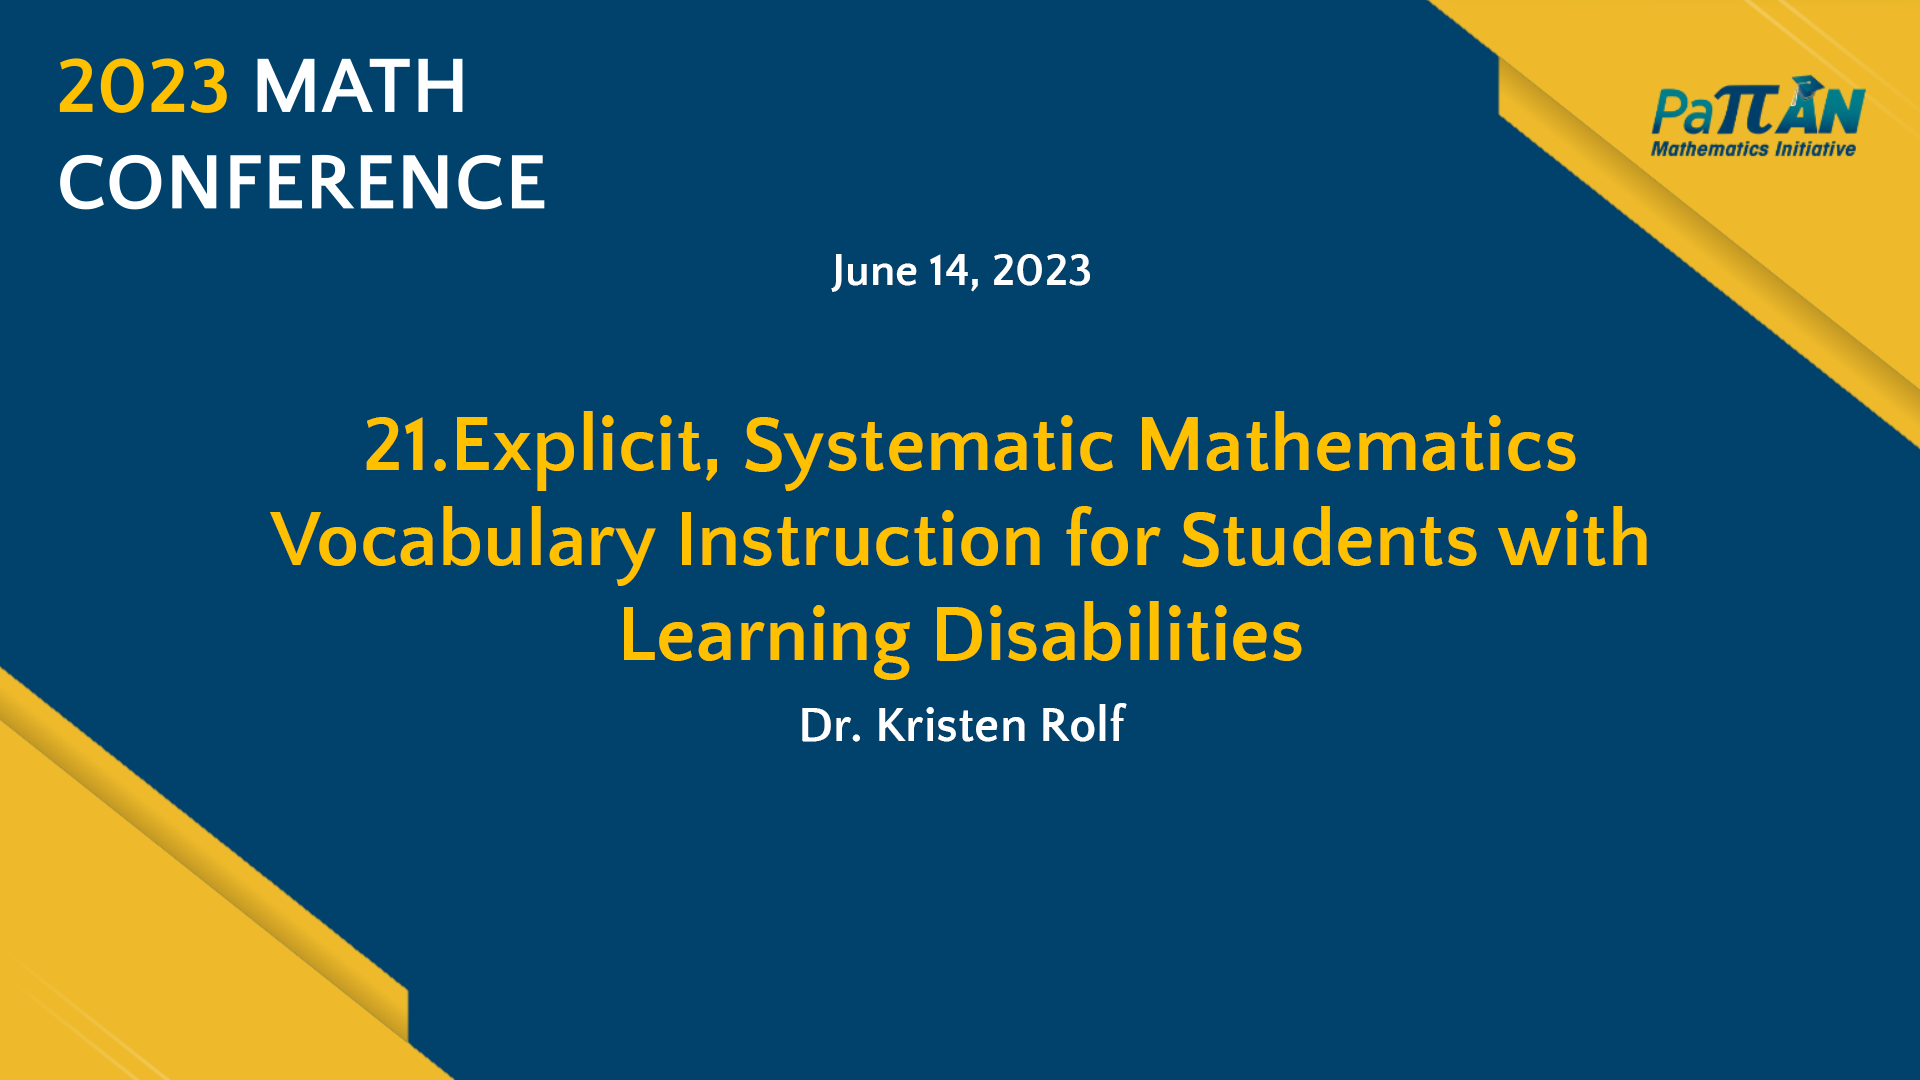 21. Explicit, Systematic Mathematics Vocabulary Instruction for Students ... | Math Conference 2023